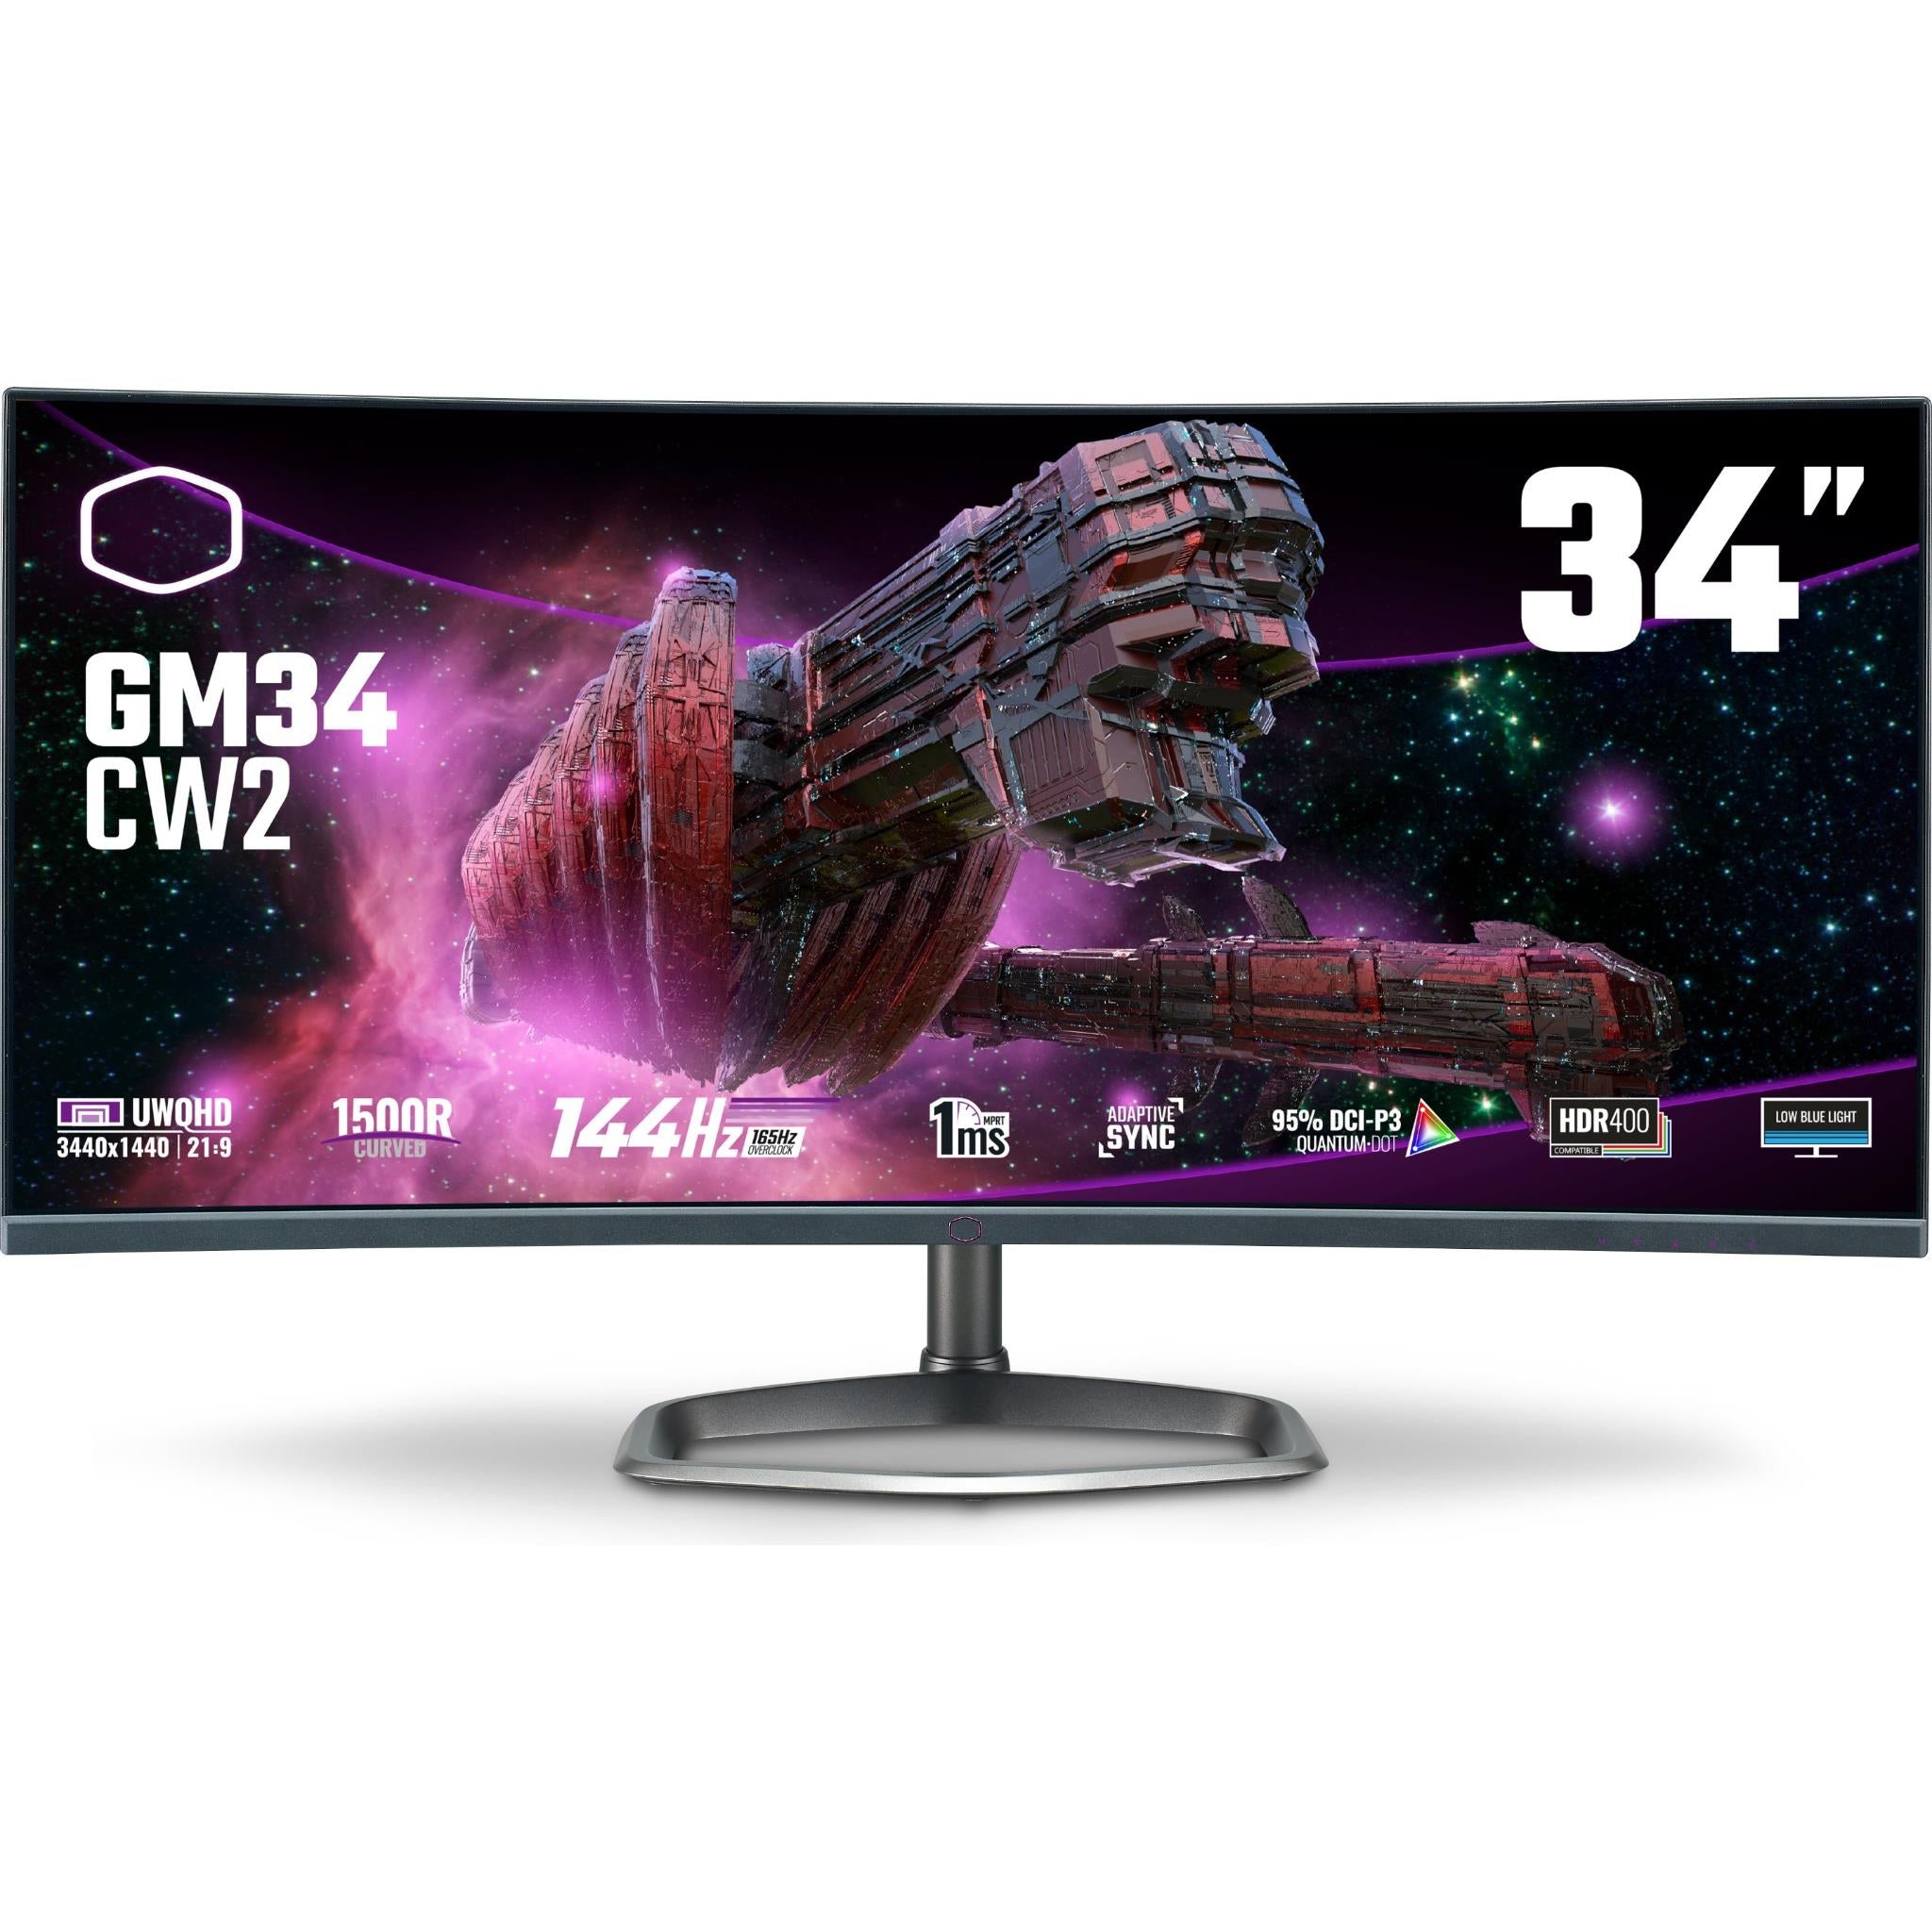 cooler master gm34-cw2 34" uwqhd 165hz curved gaming monitor